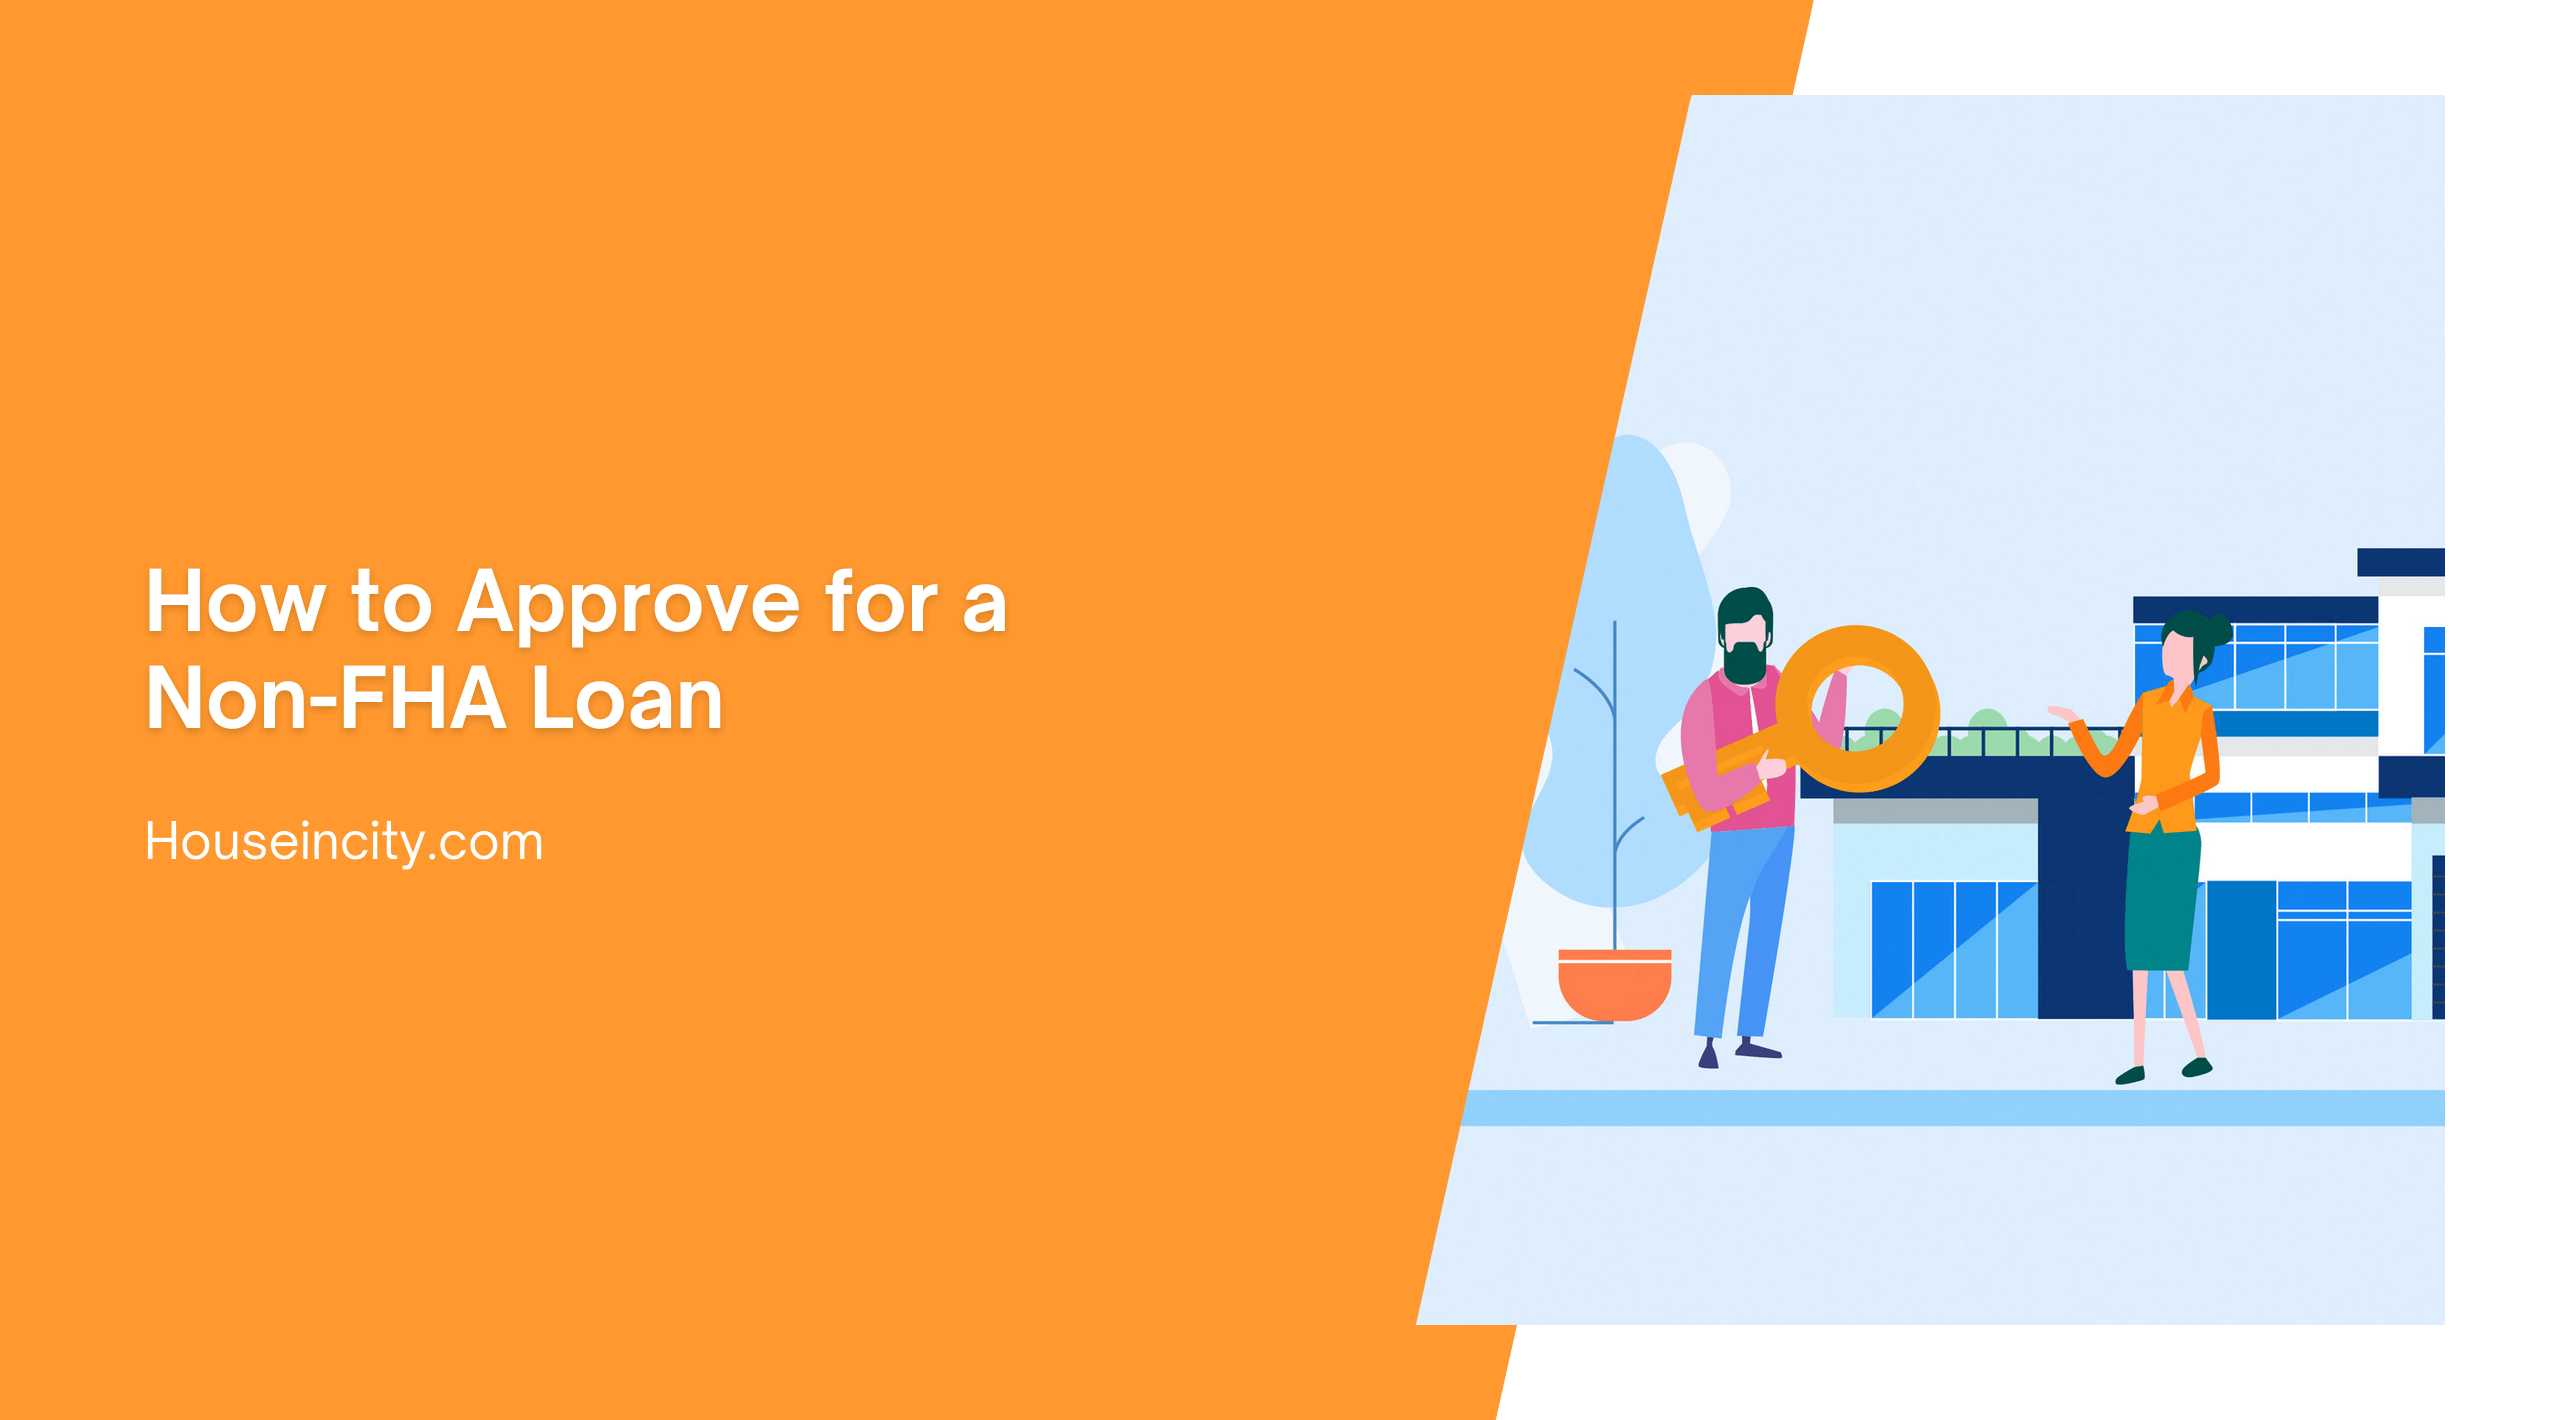 How to Approve for a Non-FHA Loan